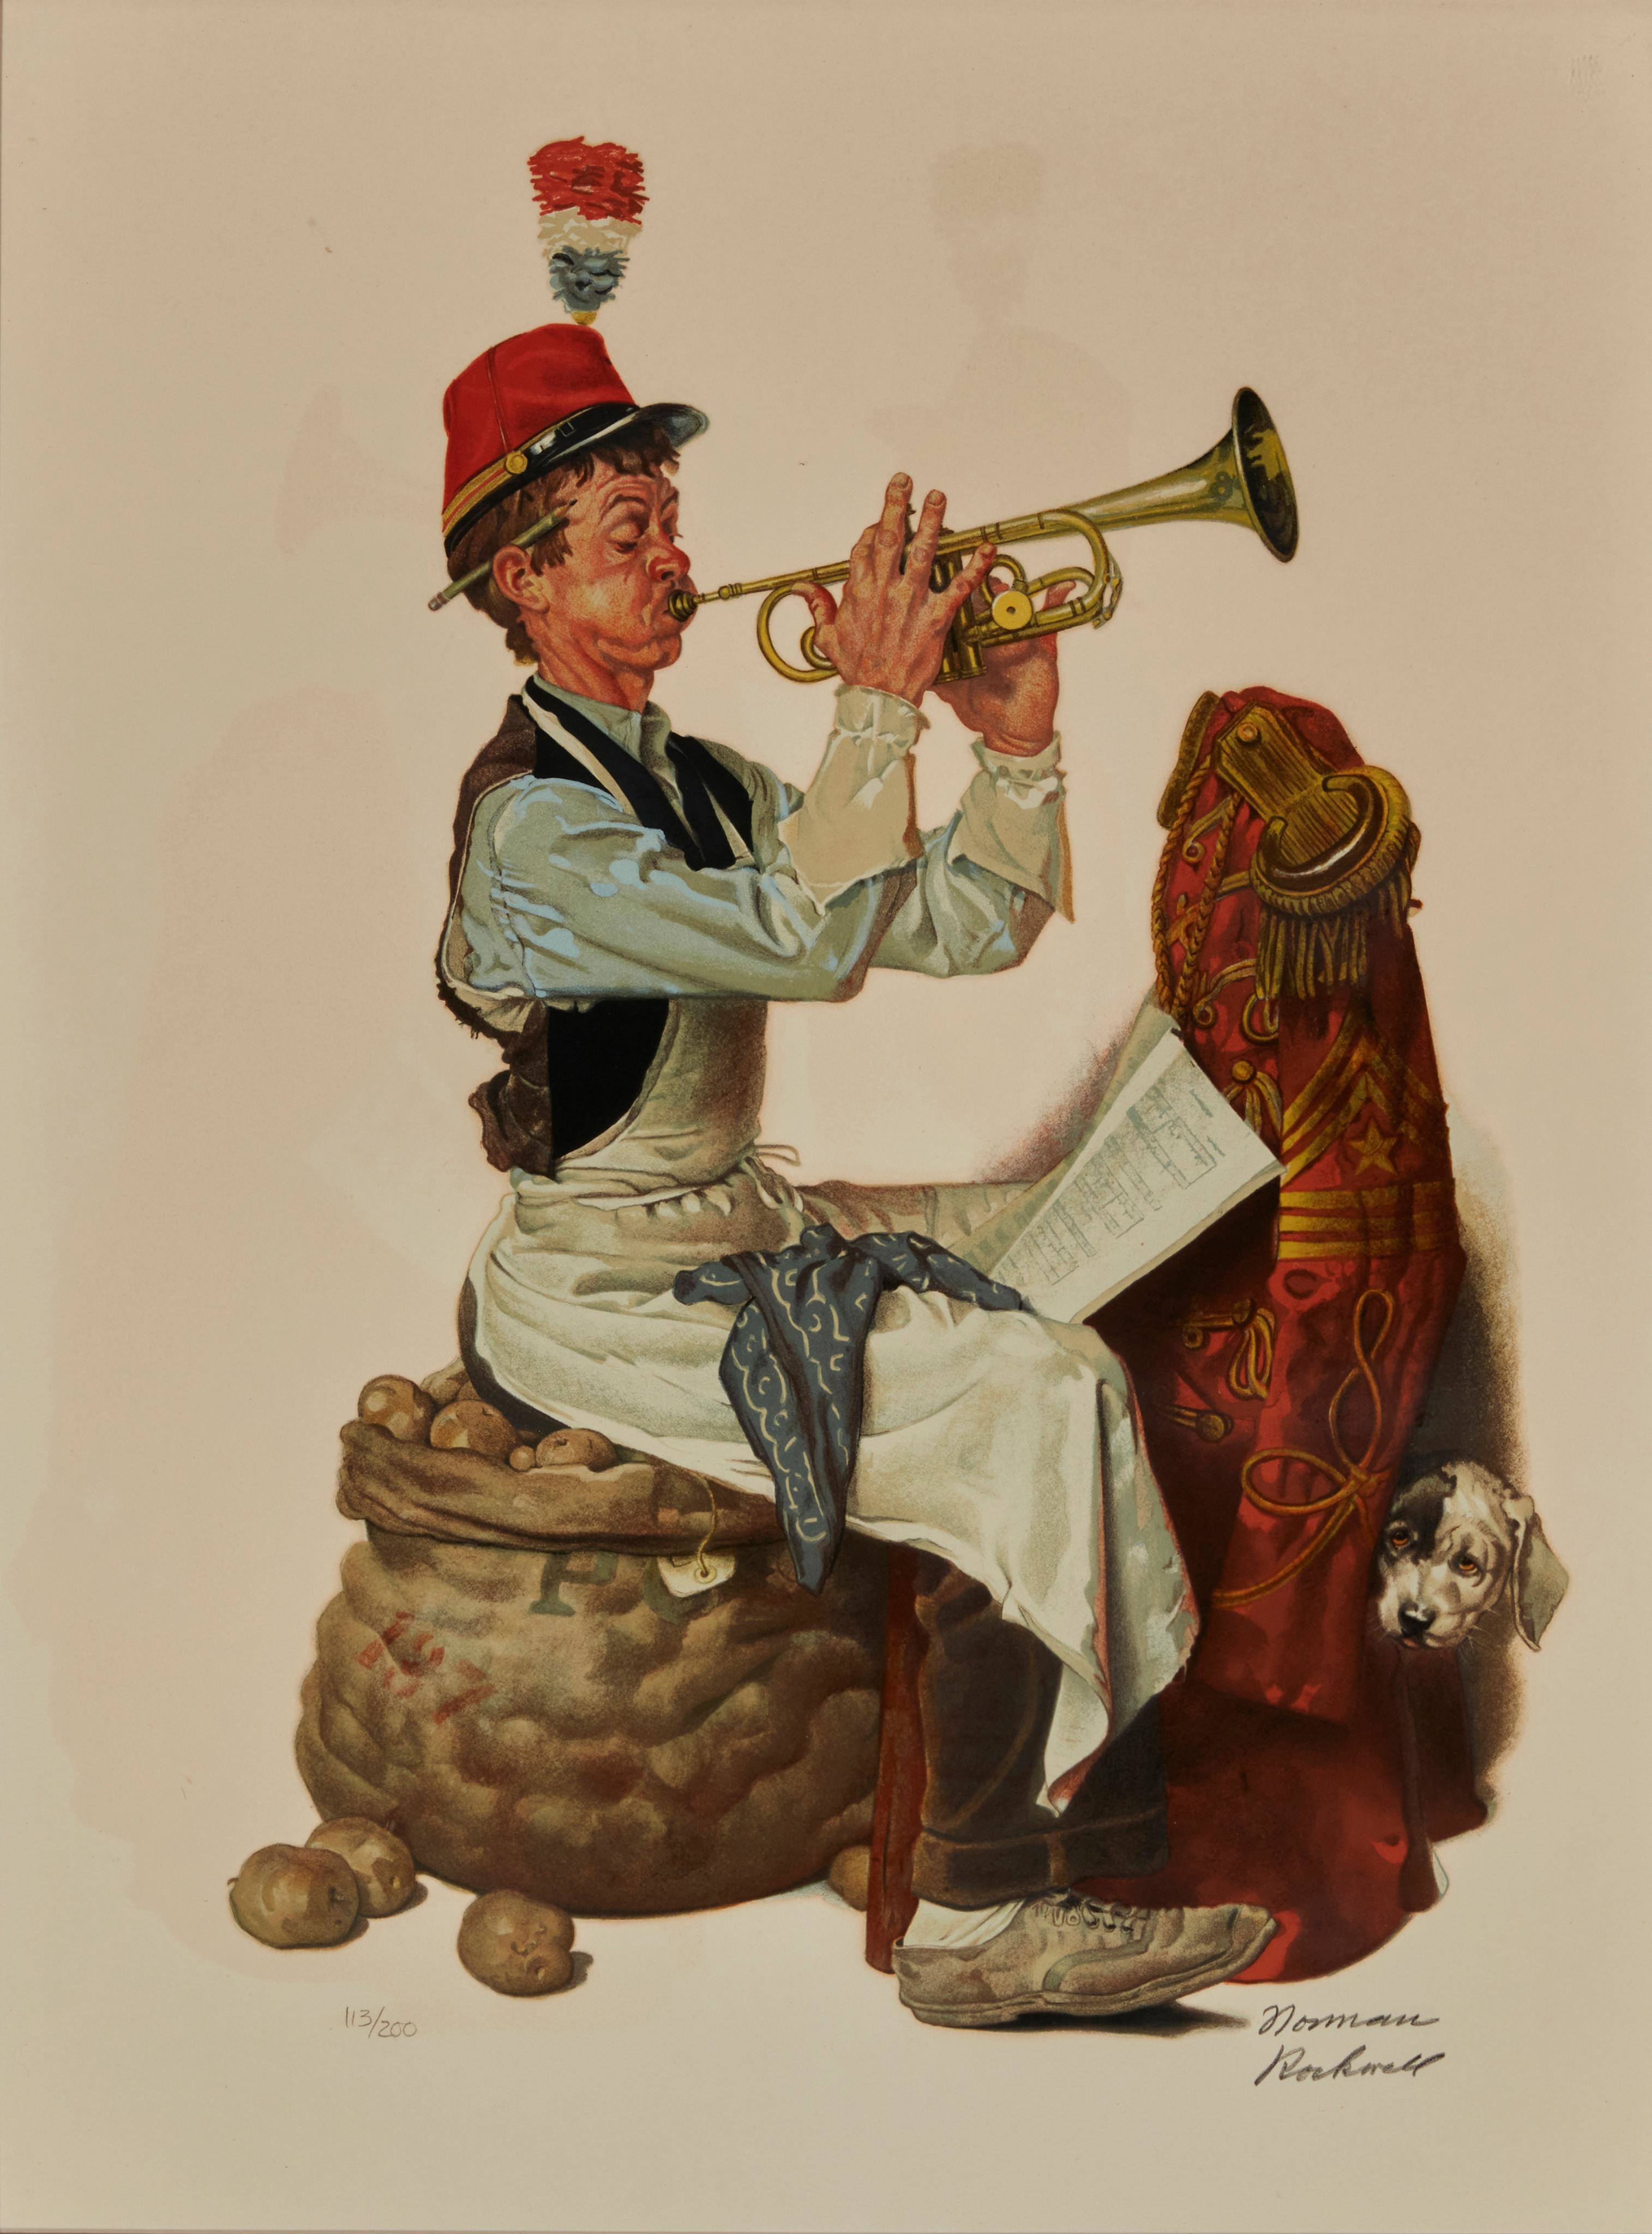 "Trumpeter," by Norman Rockwell, 1975